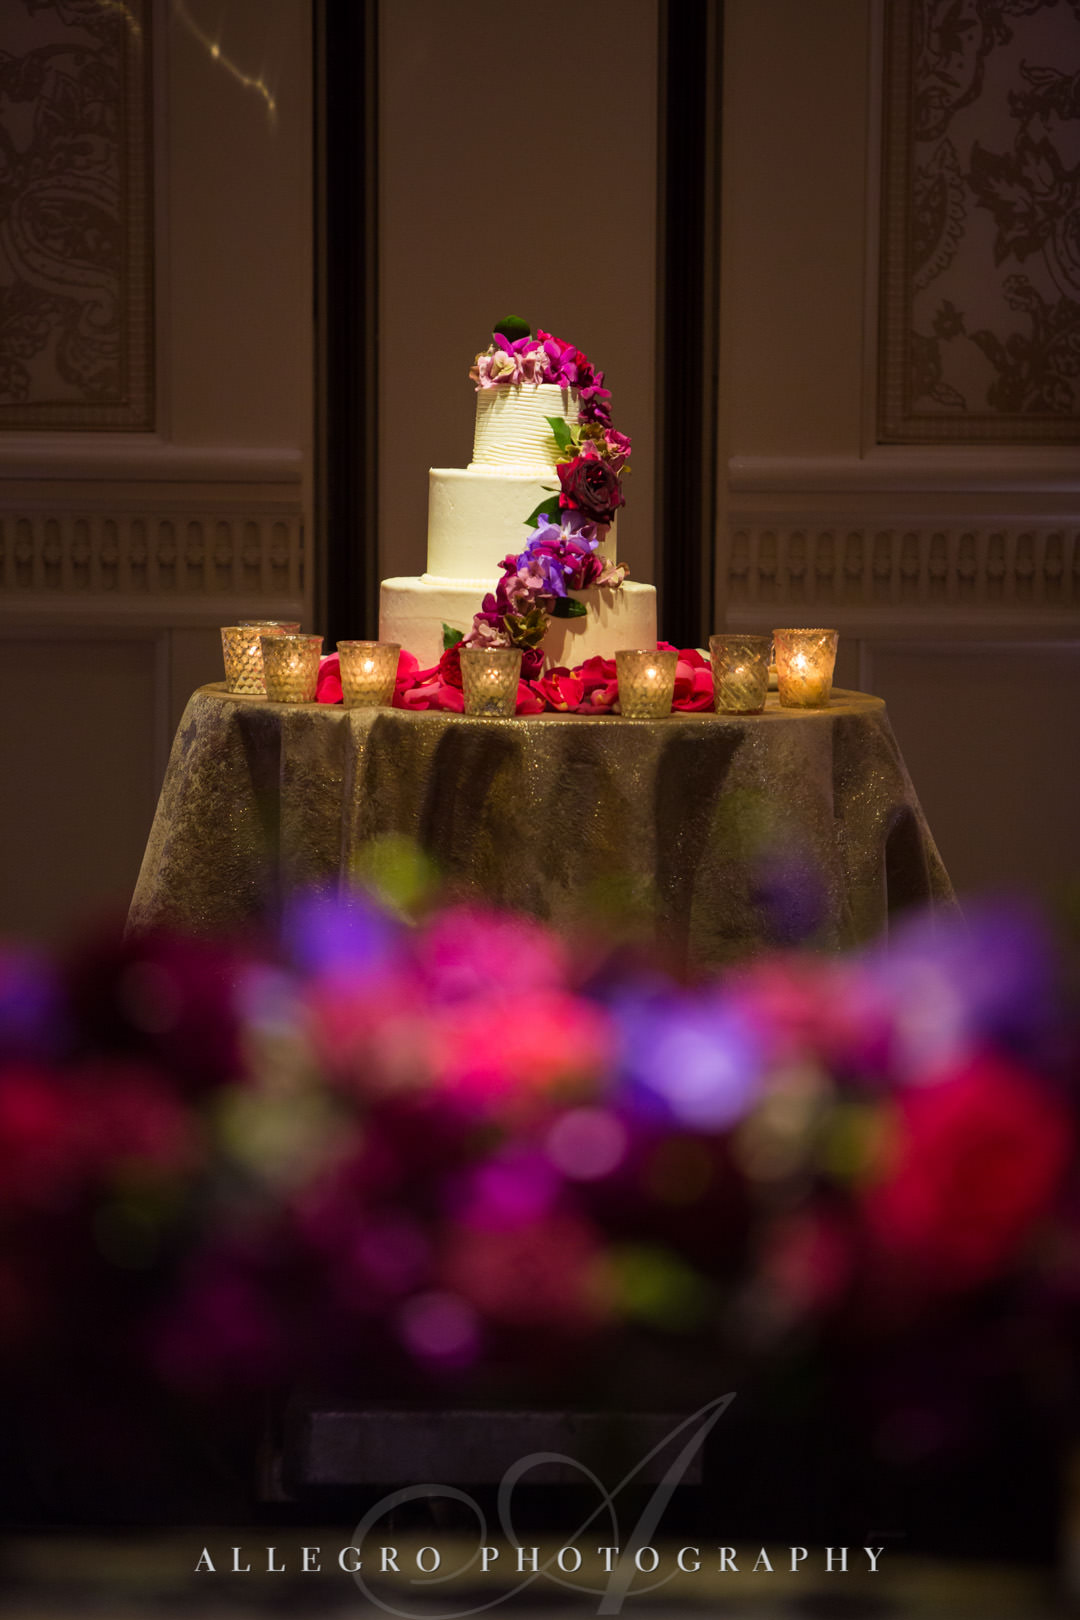 Wedding cake with flowers | Allegro Photography